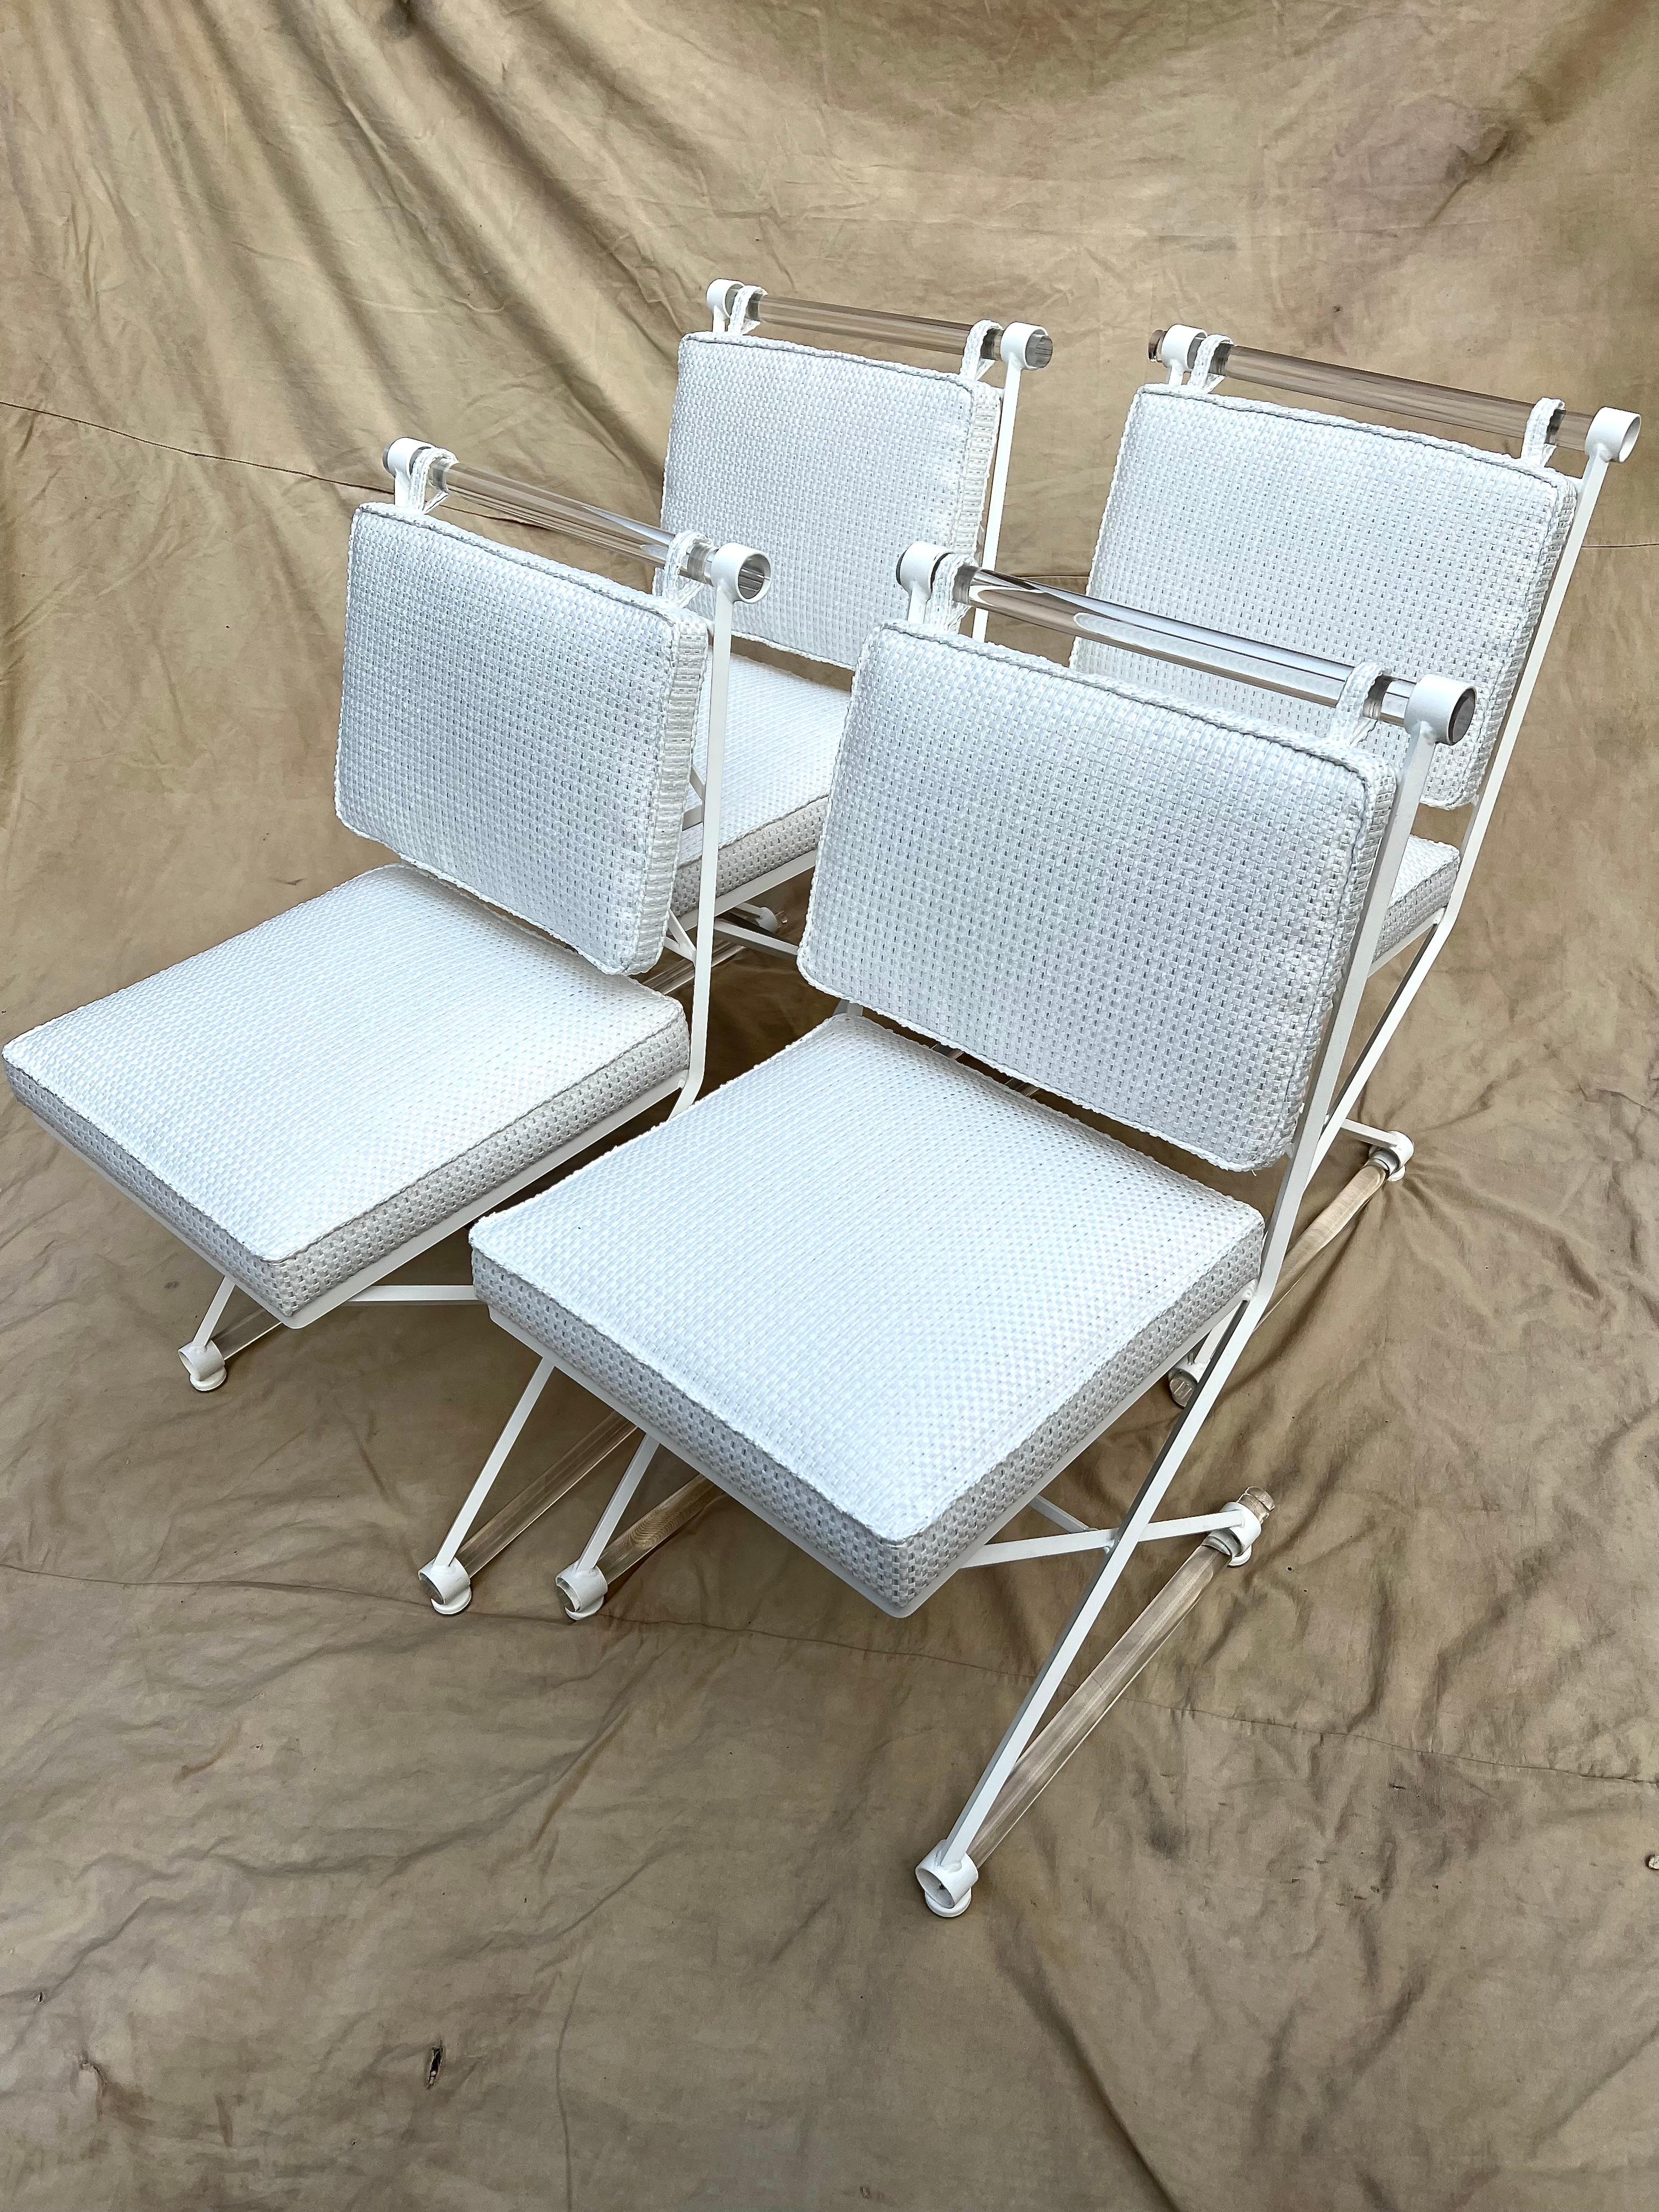 Cleo Baldon X-Form Chairs Restored with Acrylic Dowels and Sunbrella Upholstery In Good Condition For Sale In Los Angeles, CA